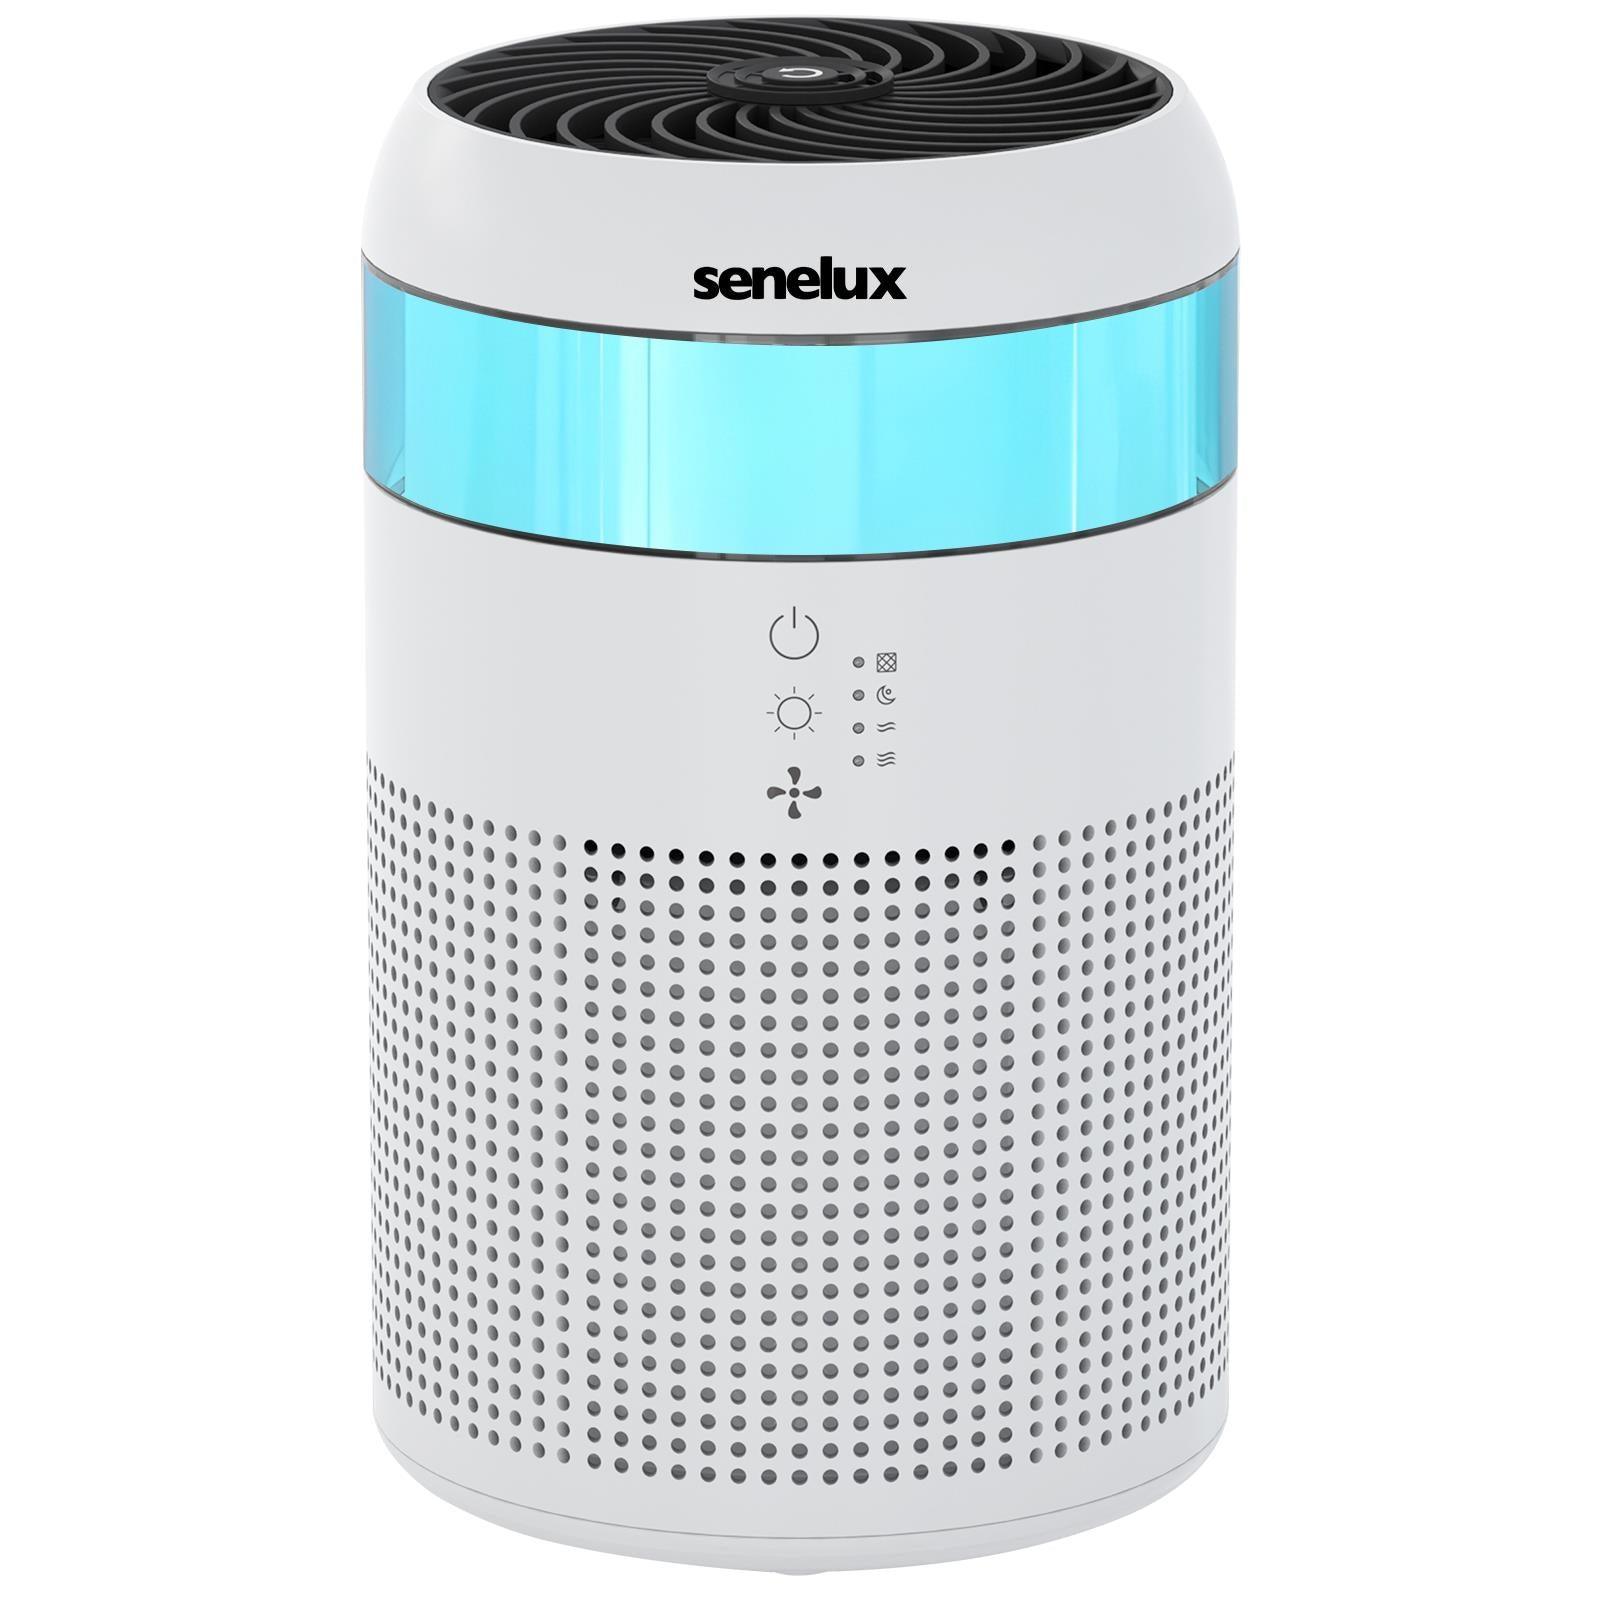 An image of a white and blue futuristic style air purifier